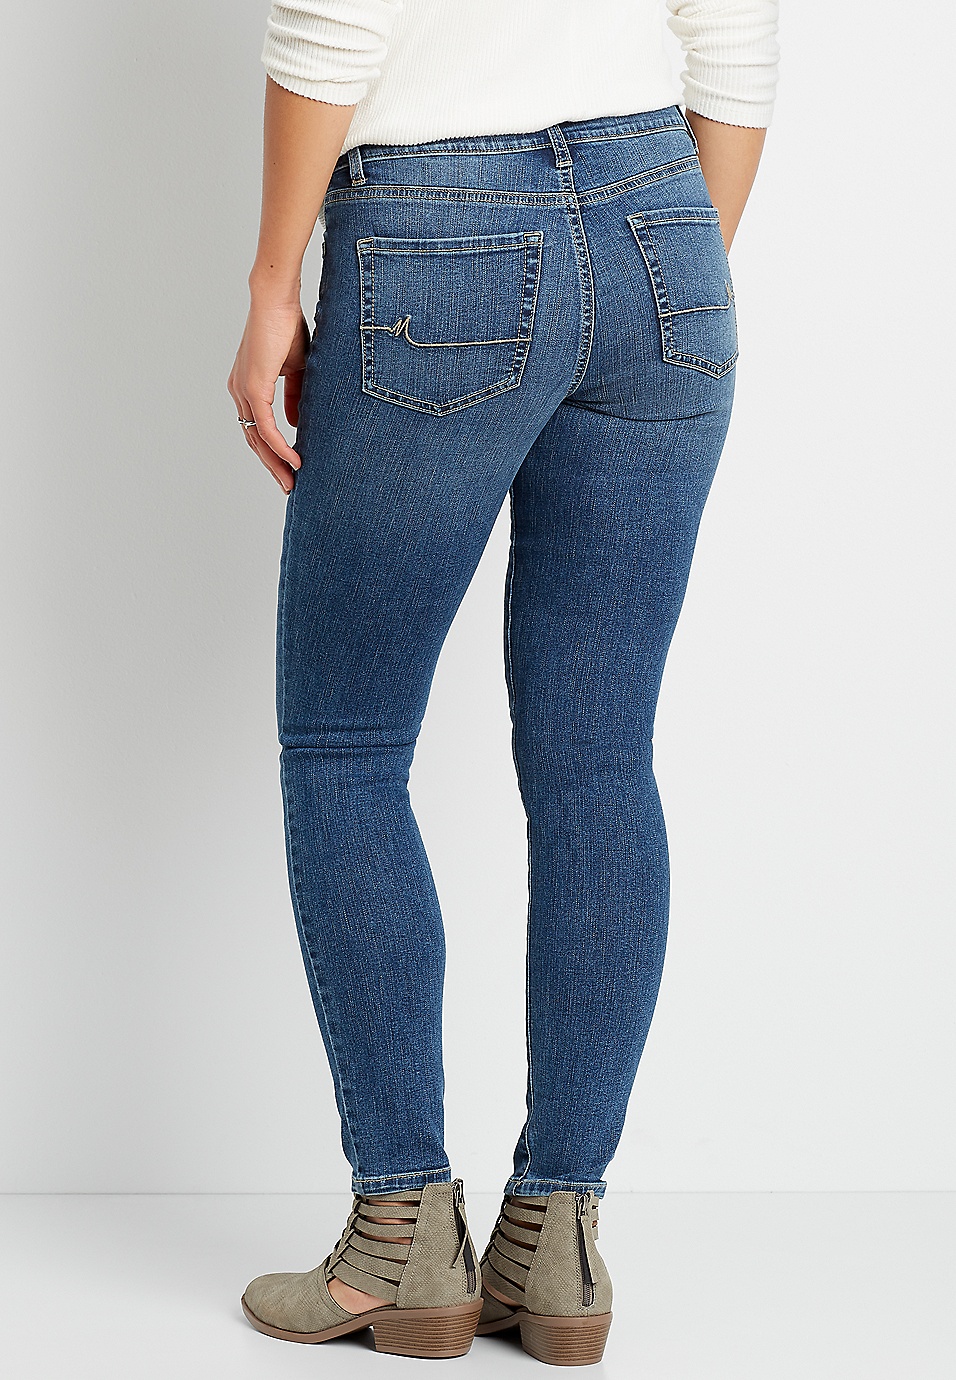 m jeans by maurices™ Classic Skinny Mid Rise | maurices